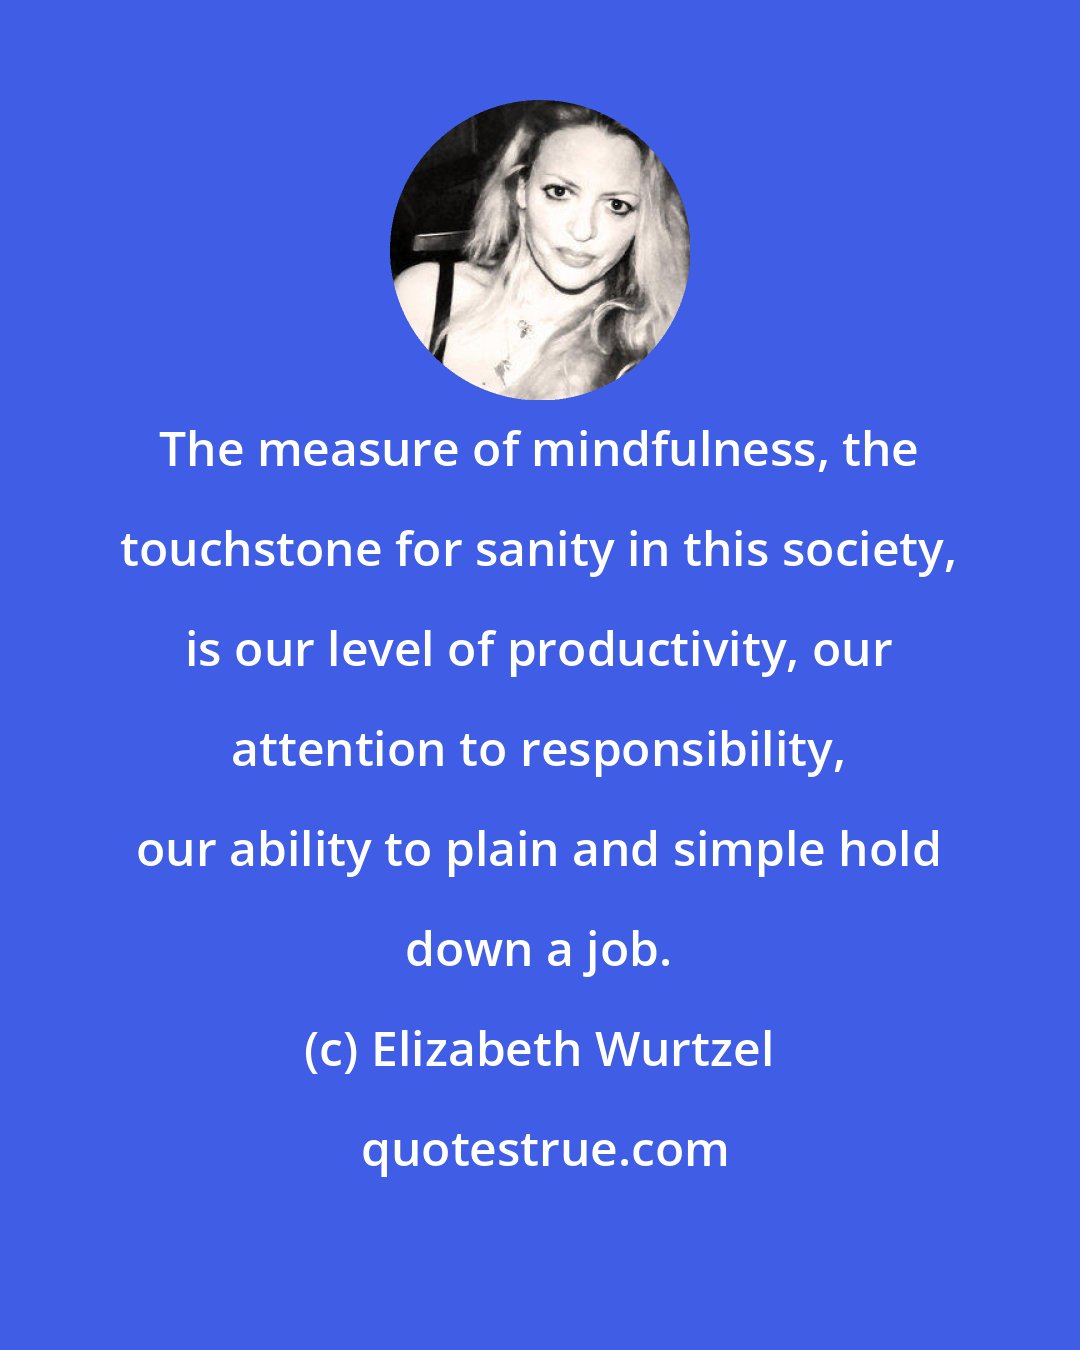 Elizabeth Wurtzel: The measure of mindfulness, the touchstone for sanity in this society, is our level of productivity, our attention to responsibility, our ability to plain and simple hold down a job.